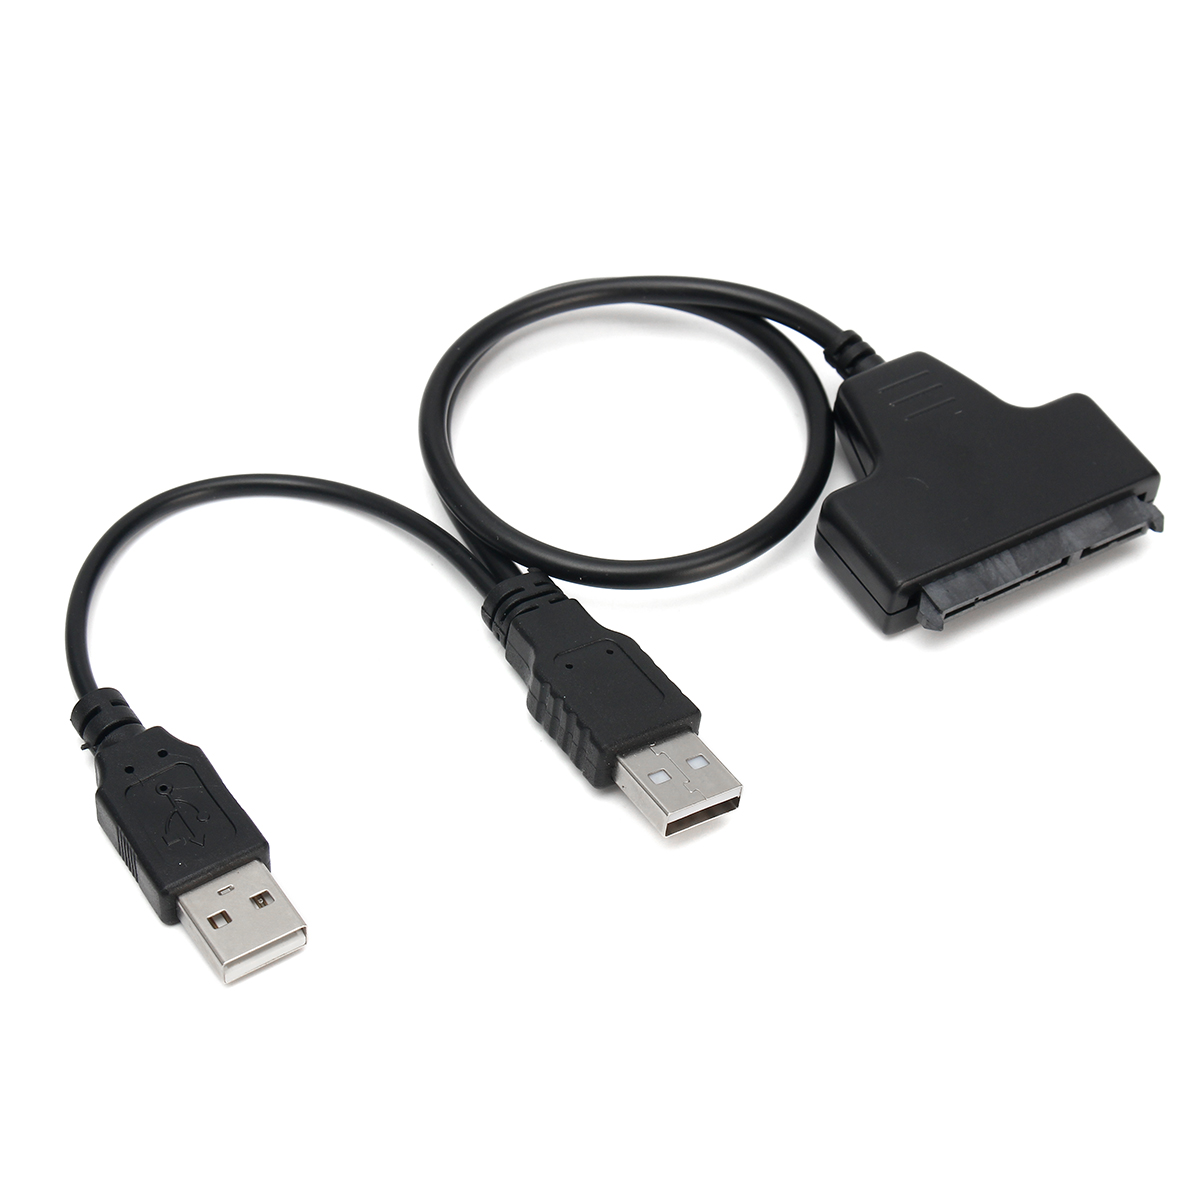 

SATA 7+15 22 Pin to USB 2.0 Adapter Cable For 2.5 Inch HDD Laptop Hard Disk Drive